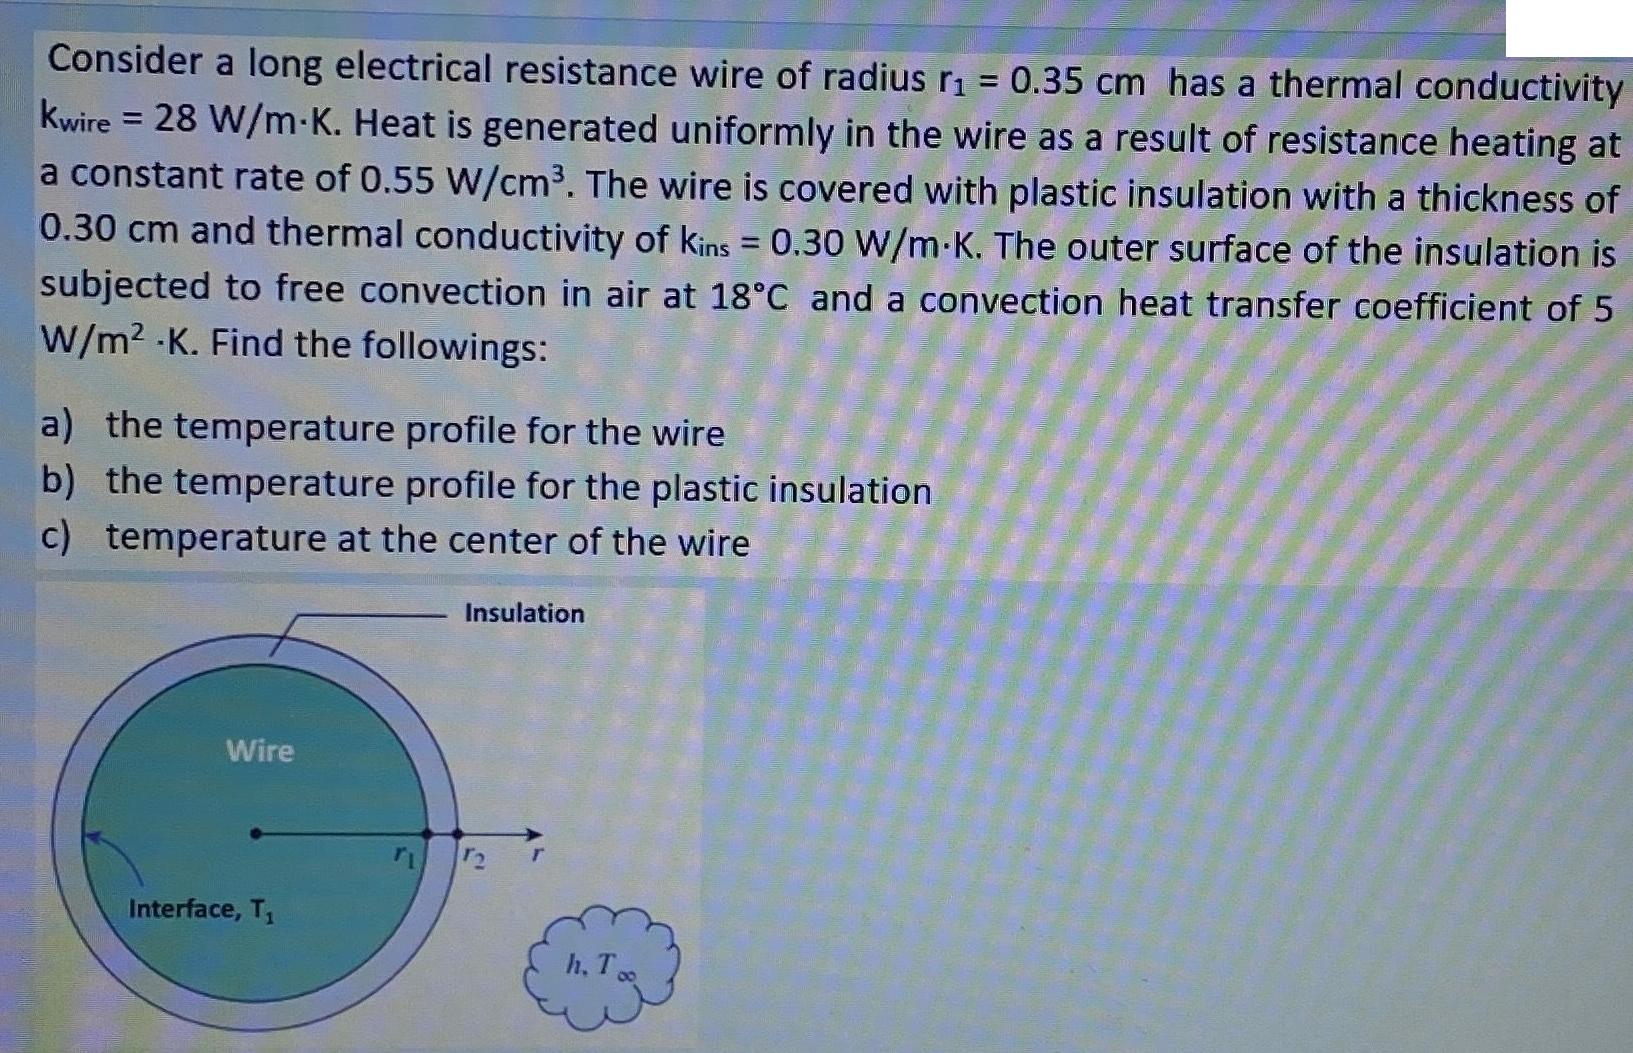 = Consider a long electrical resistance wire of radius r 0.35 cm has a thermal conductivity kwire = 28 W/m.K.